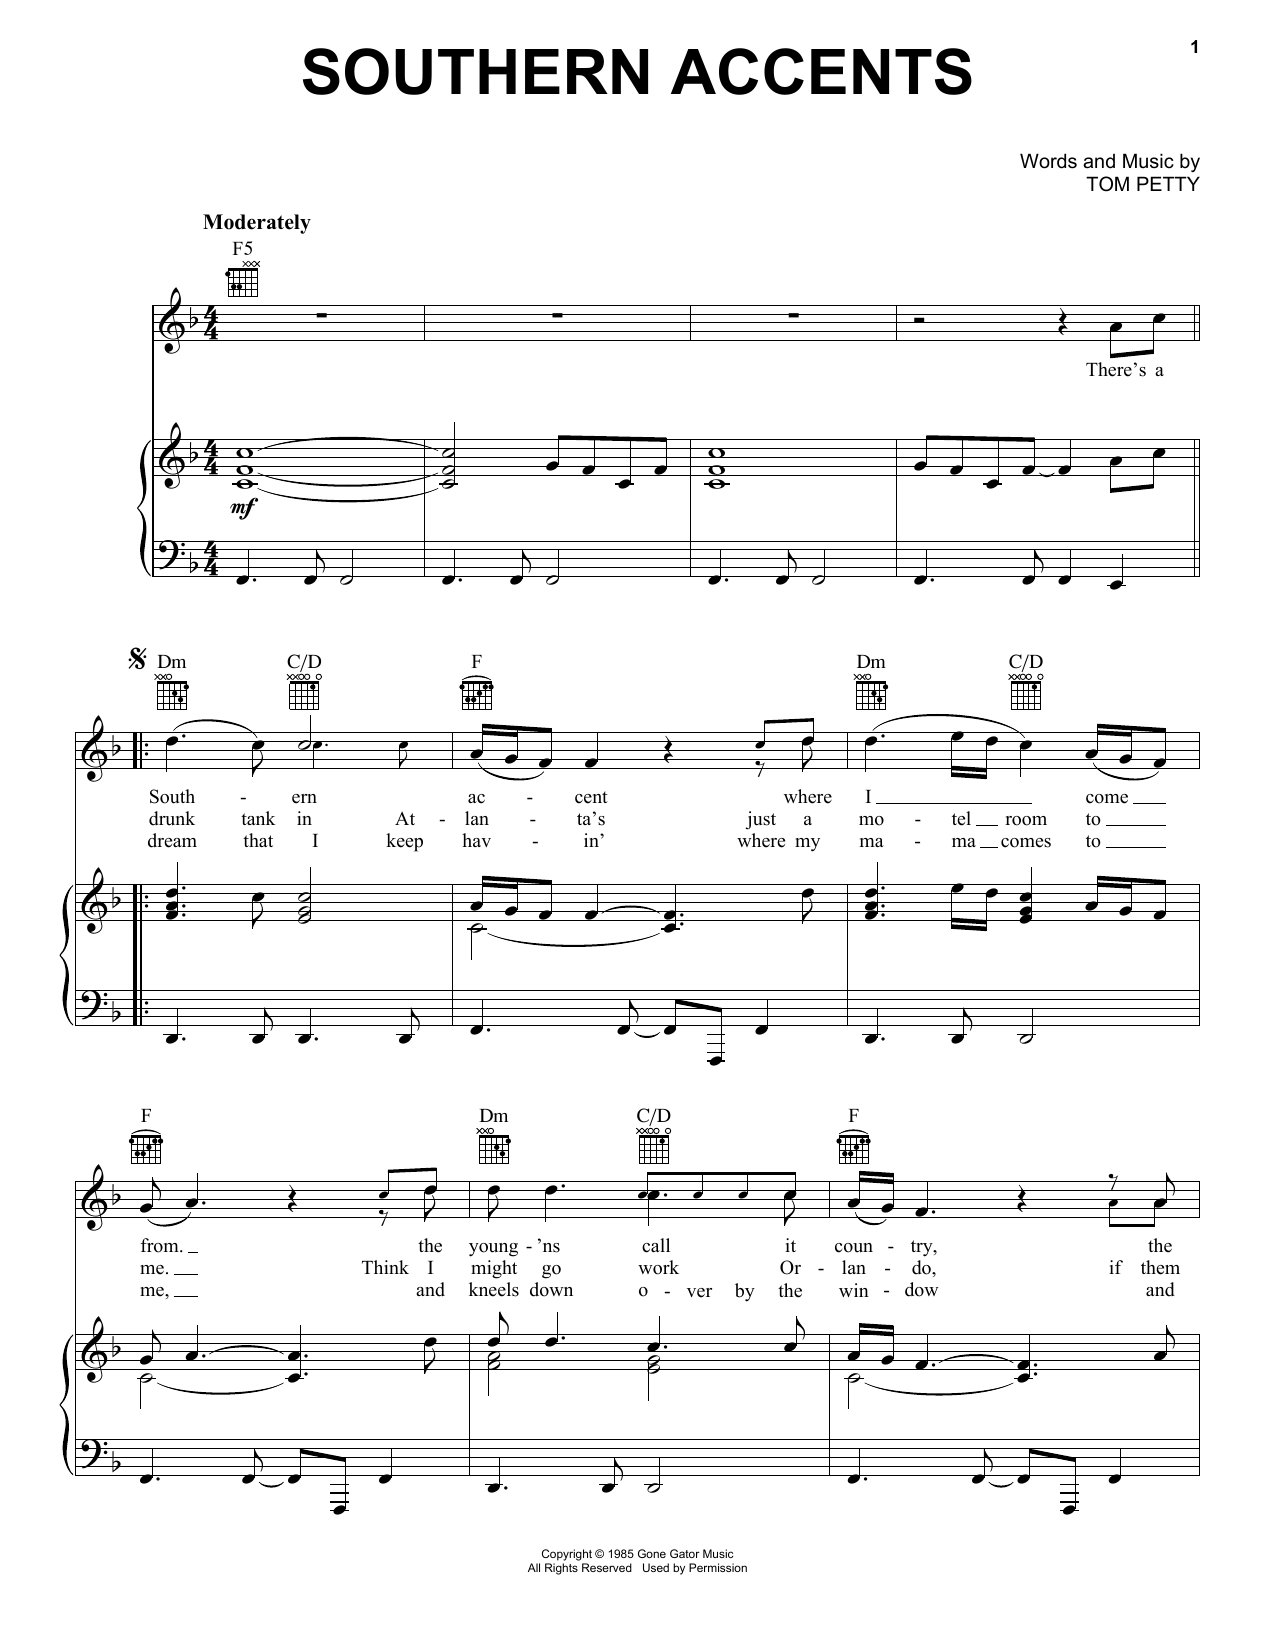 Download Tom Petty Southern Accents Sheet Music